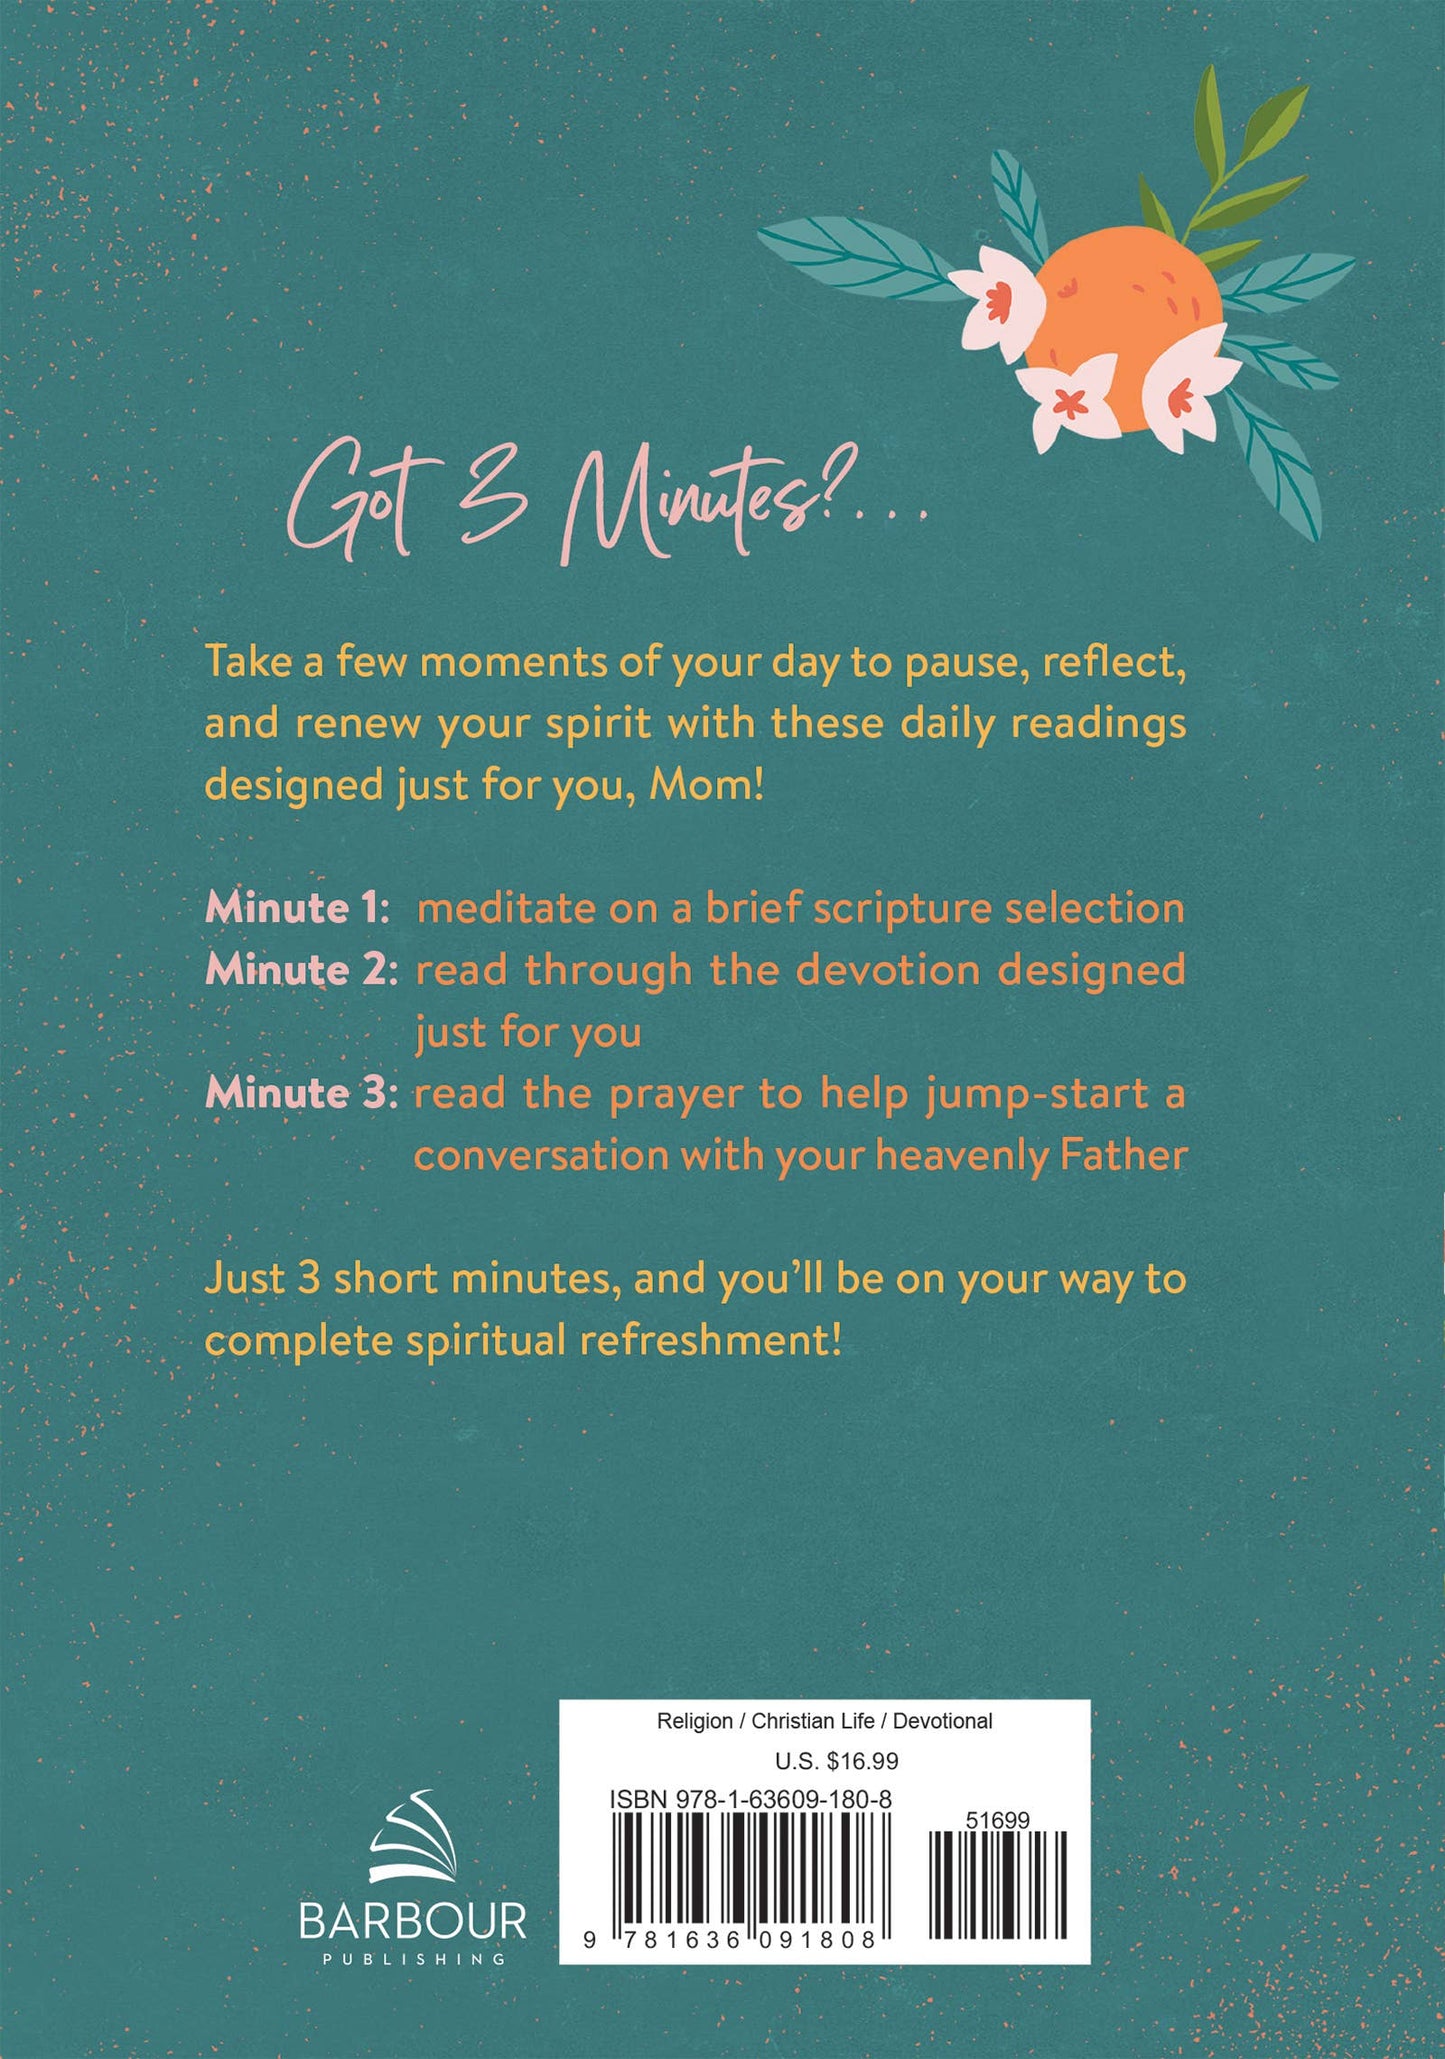 3-Minute Daily Devotions for Moms